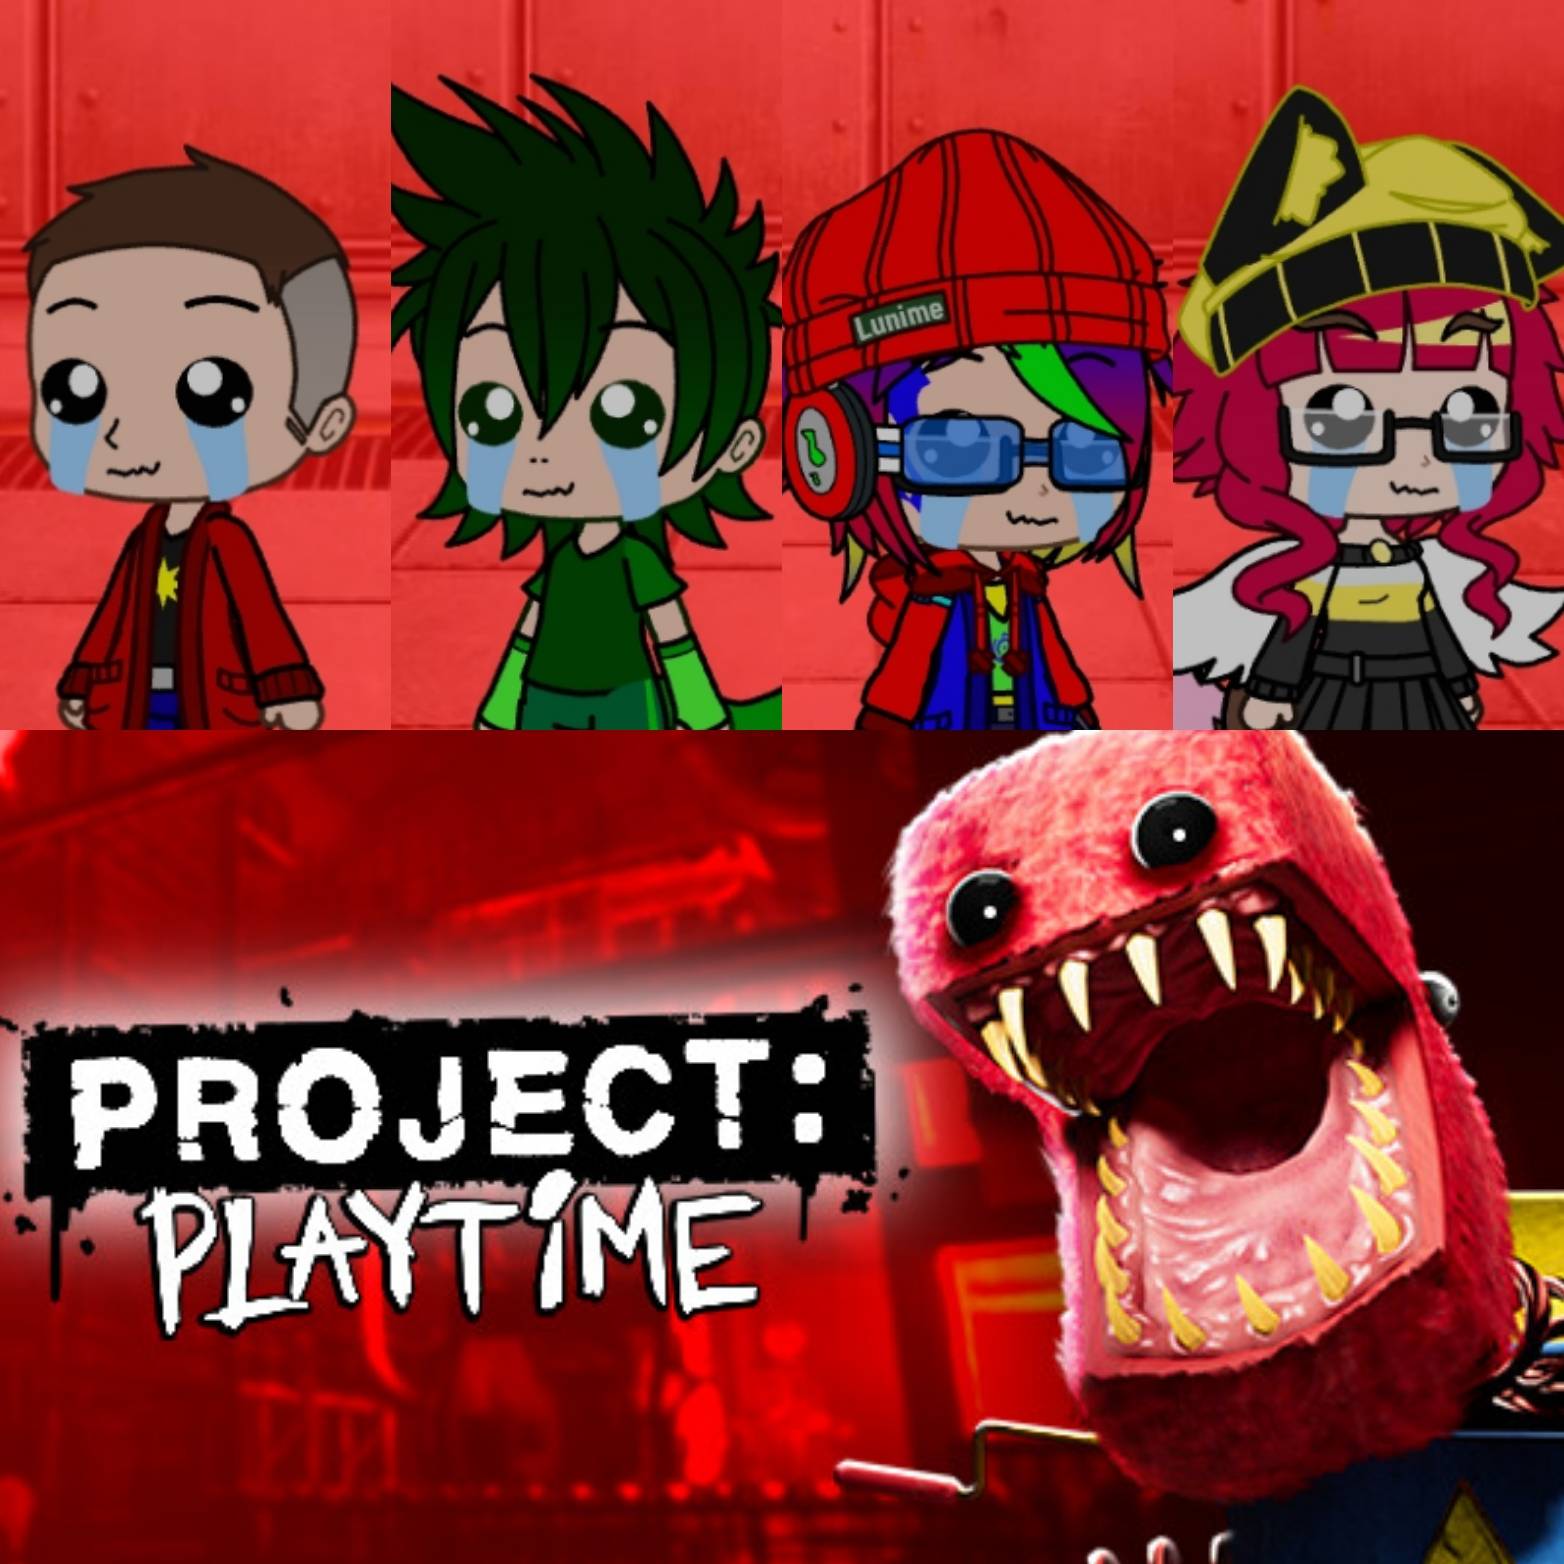 Me and my friends in project playtime by blueraptor9000 on DeviantArt